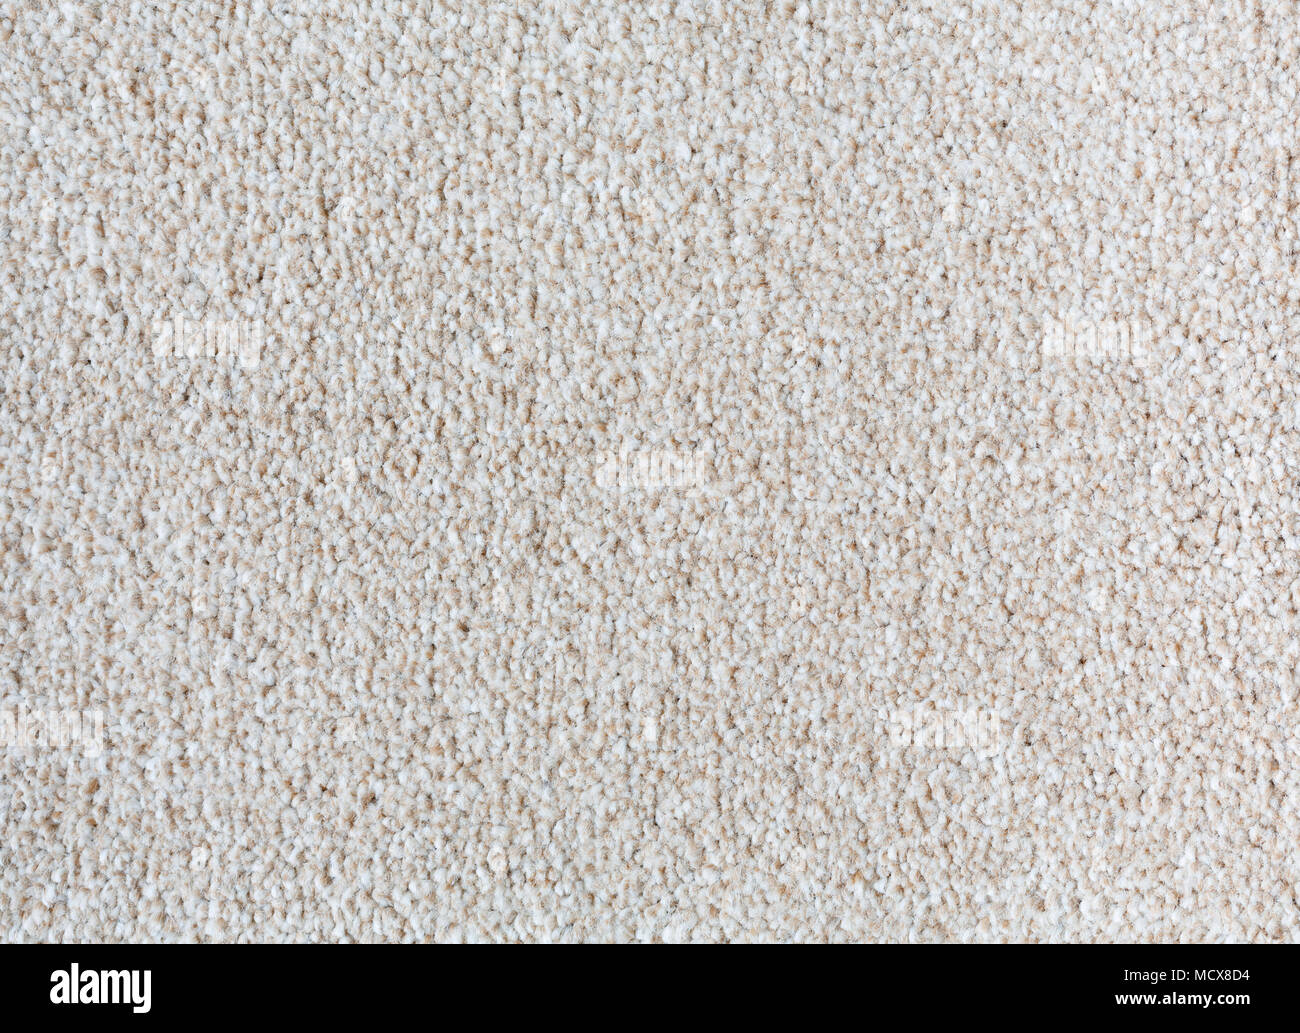 Carpet texture background in a neutral color closeup Stock Photo